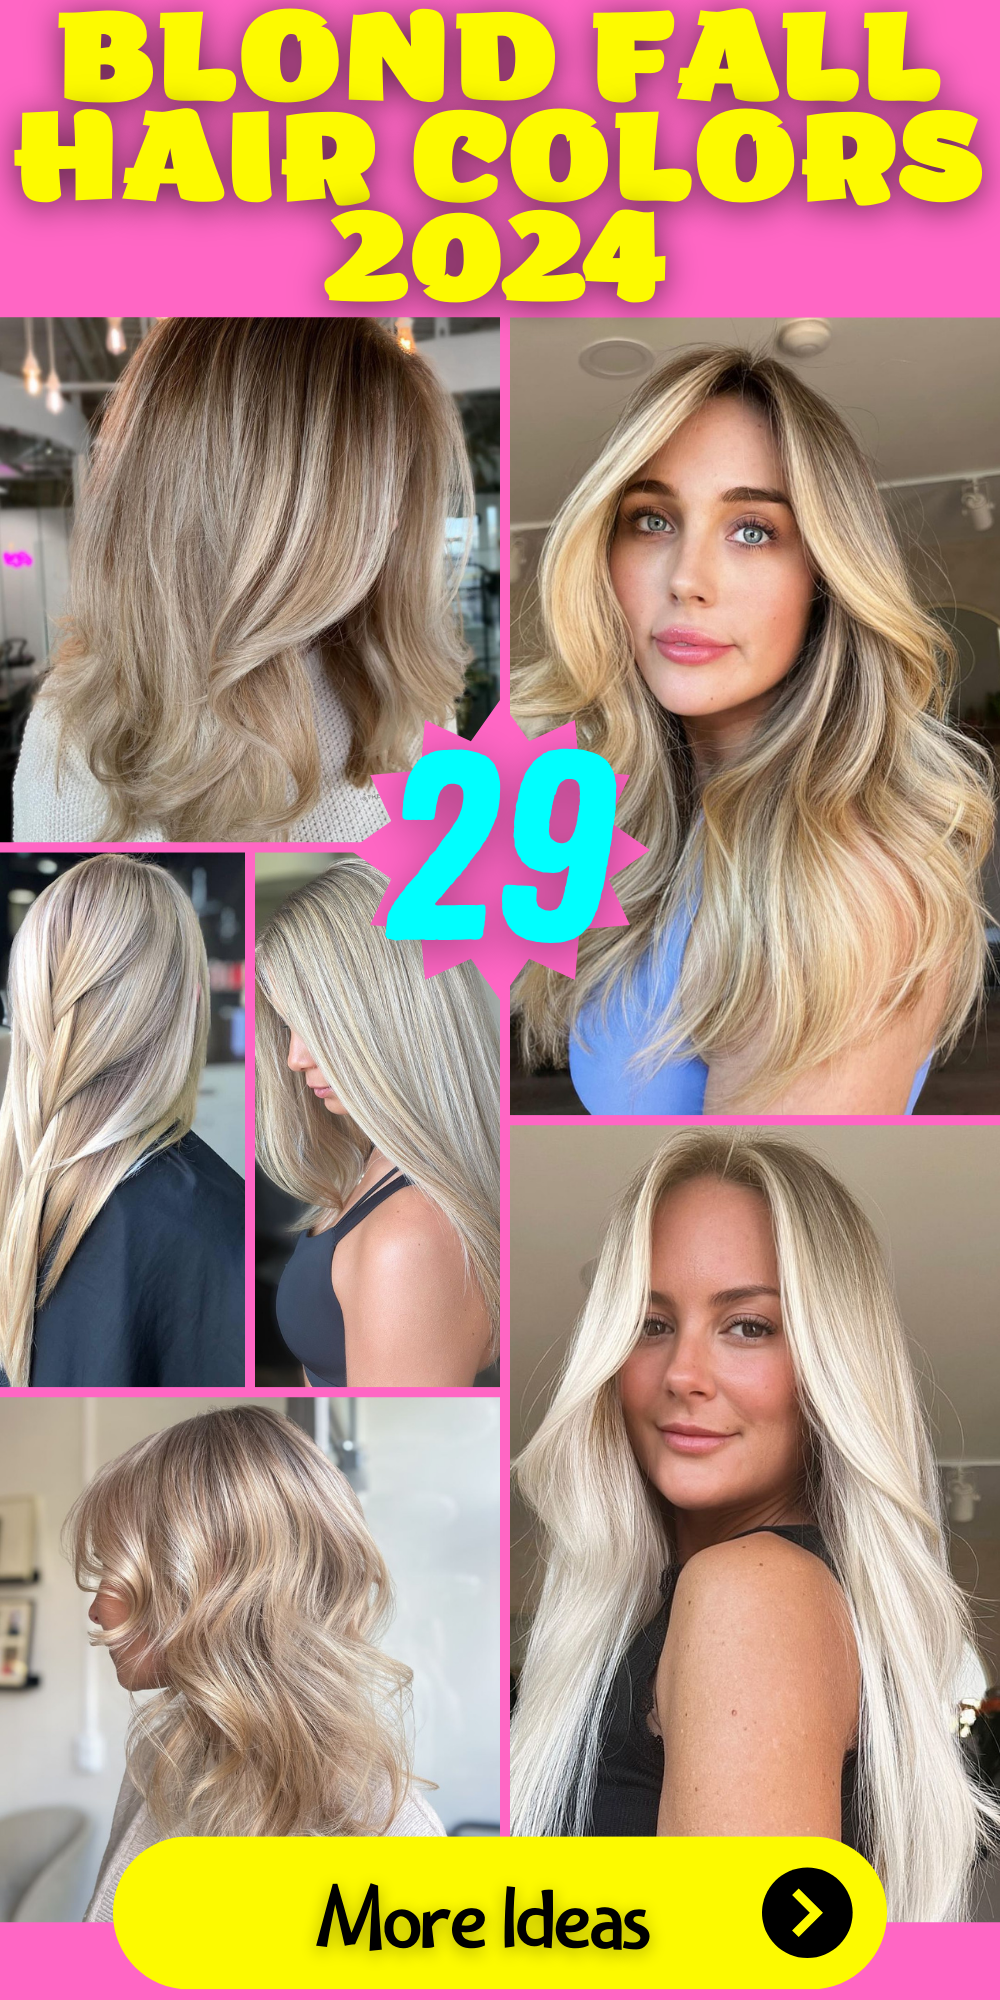 Blond Fall Hair Colors 2024: 29 Gorgeous Ideas for a Chic Seasonal Update